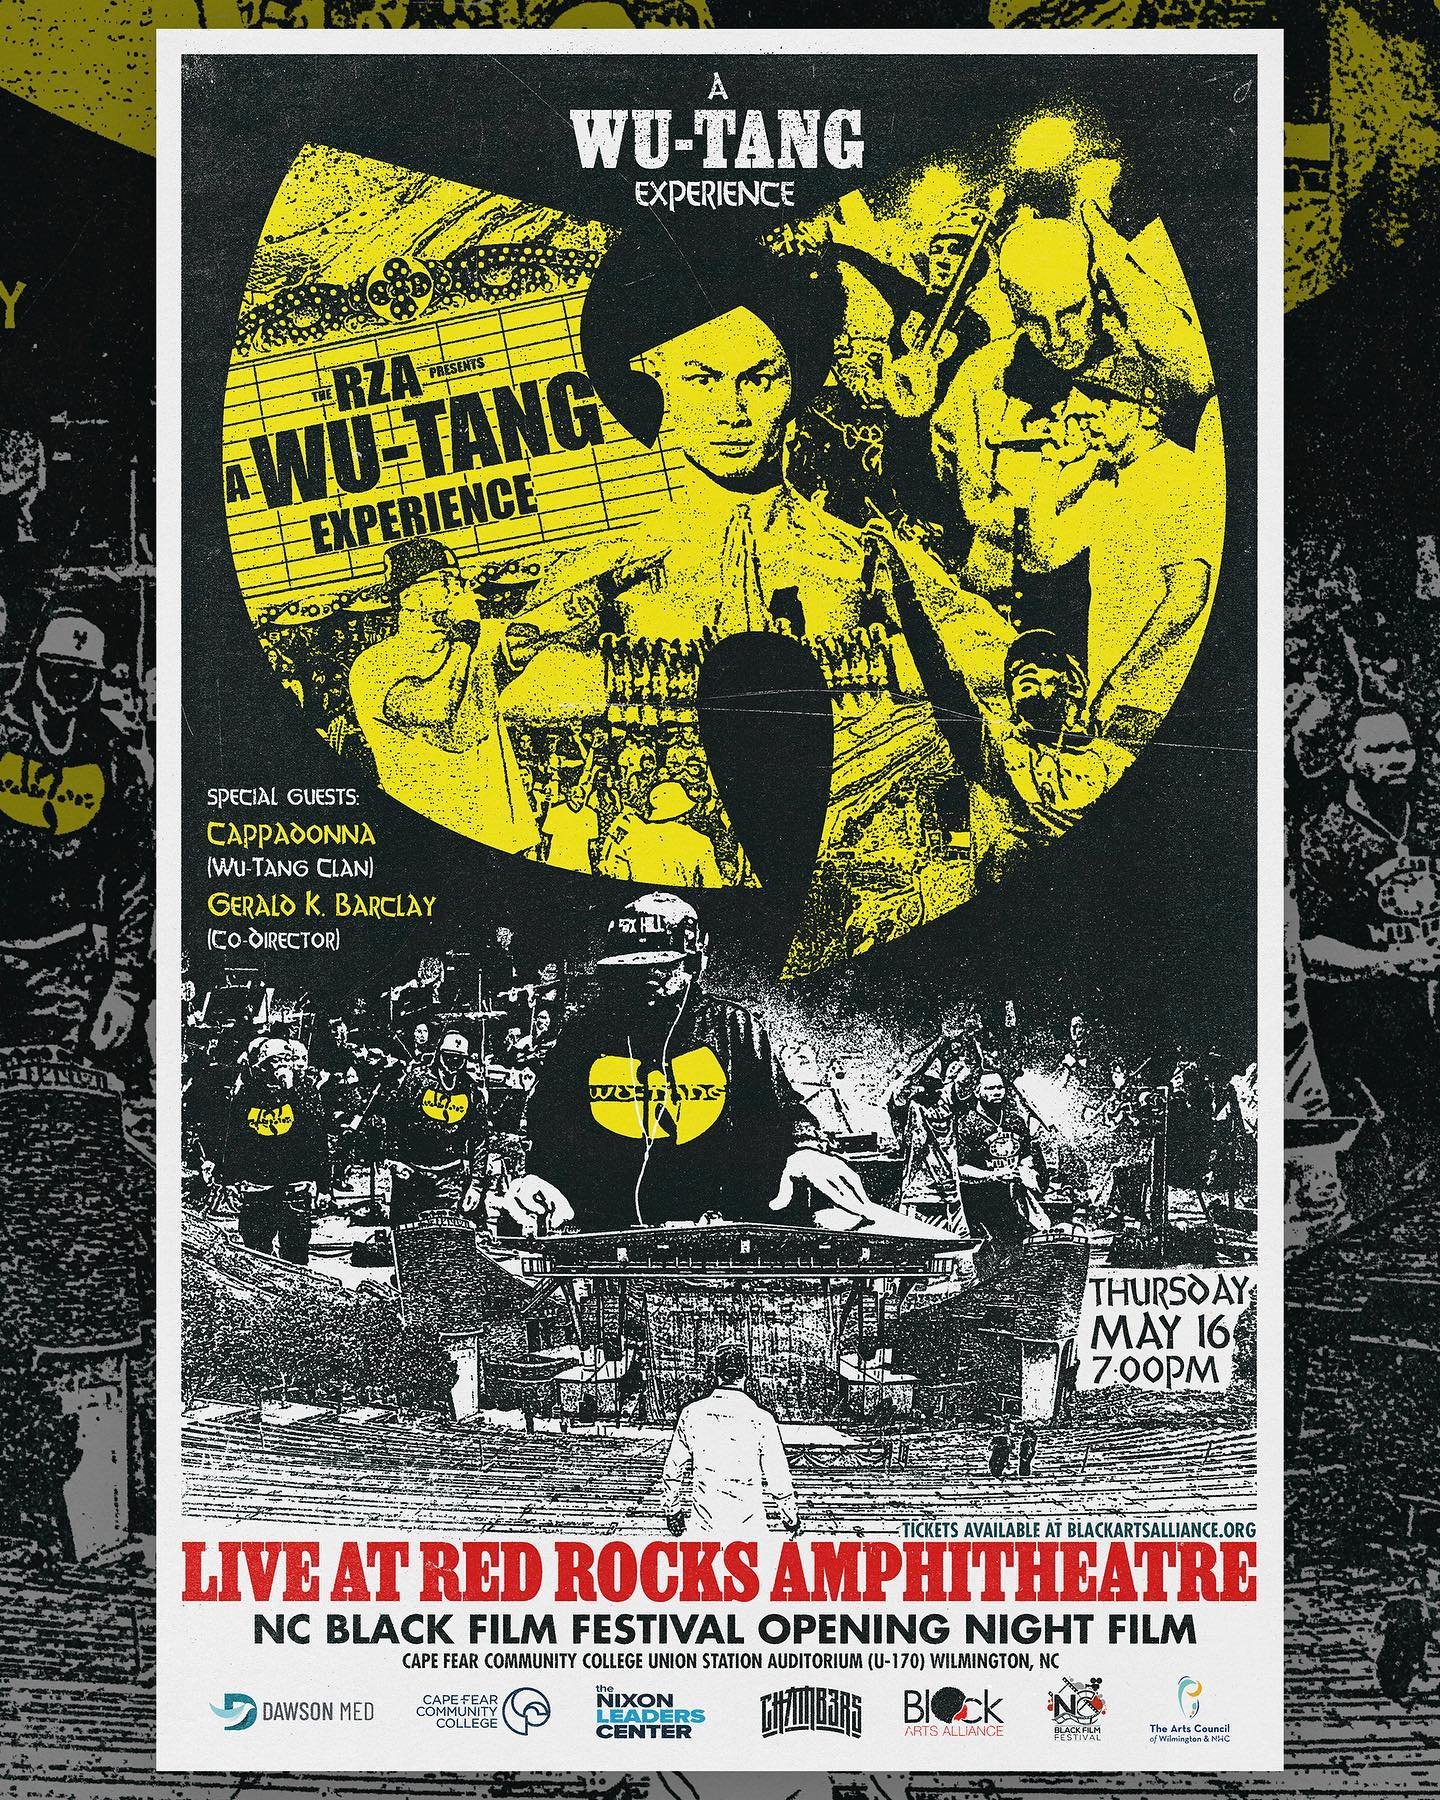 Witnessed one of the most extraordinary concerts in hip-hop music history! 

Don&rsquo;t miss the North Carolina Black Film Festival&rsquo;s (@ncblackfilm) Opening Night Film A WU-TANG EXPERIENCE: LIVE AT RED ROCKS AMPHITHEATRE, directed by The RZA (